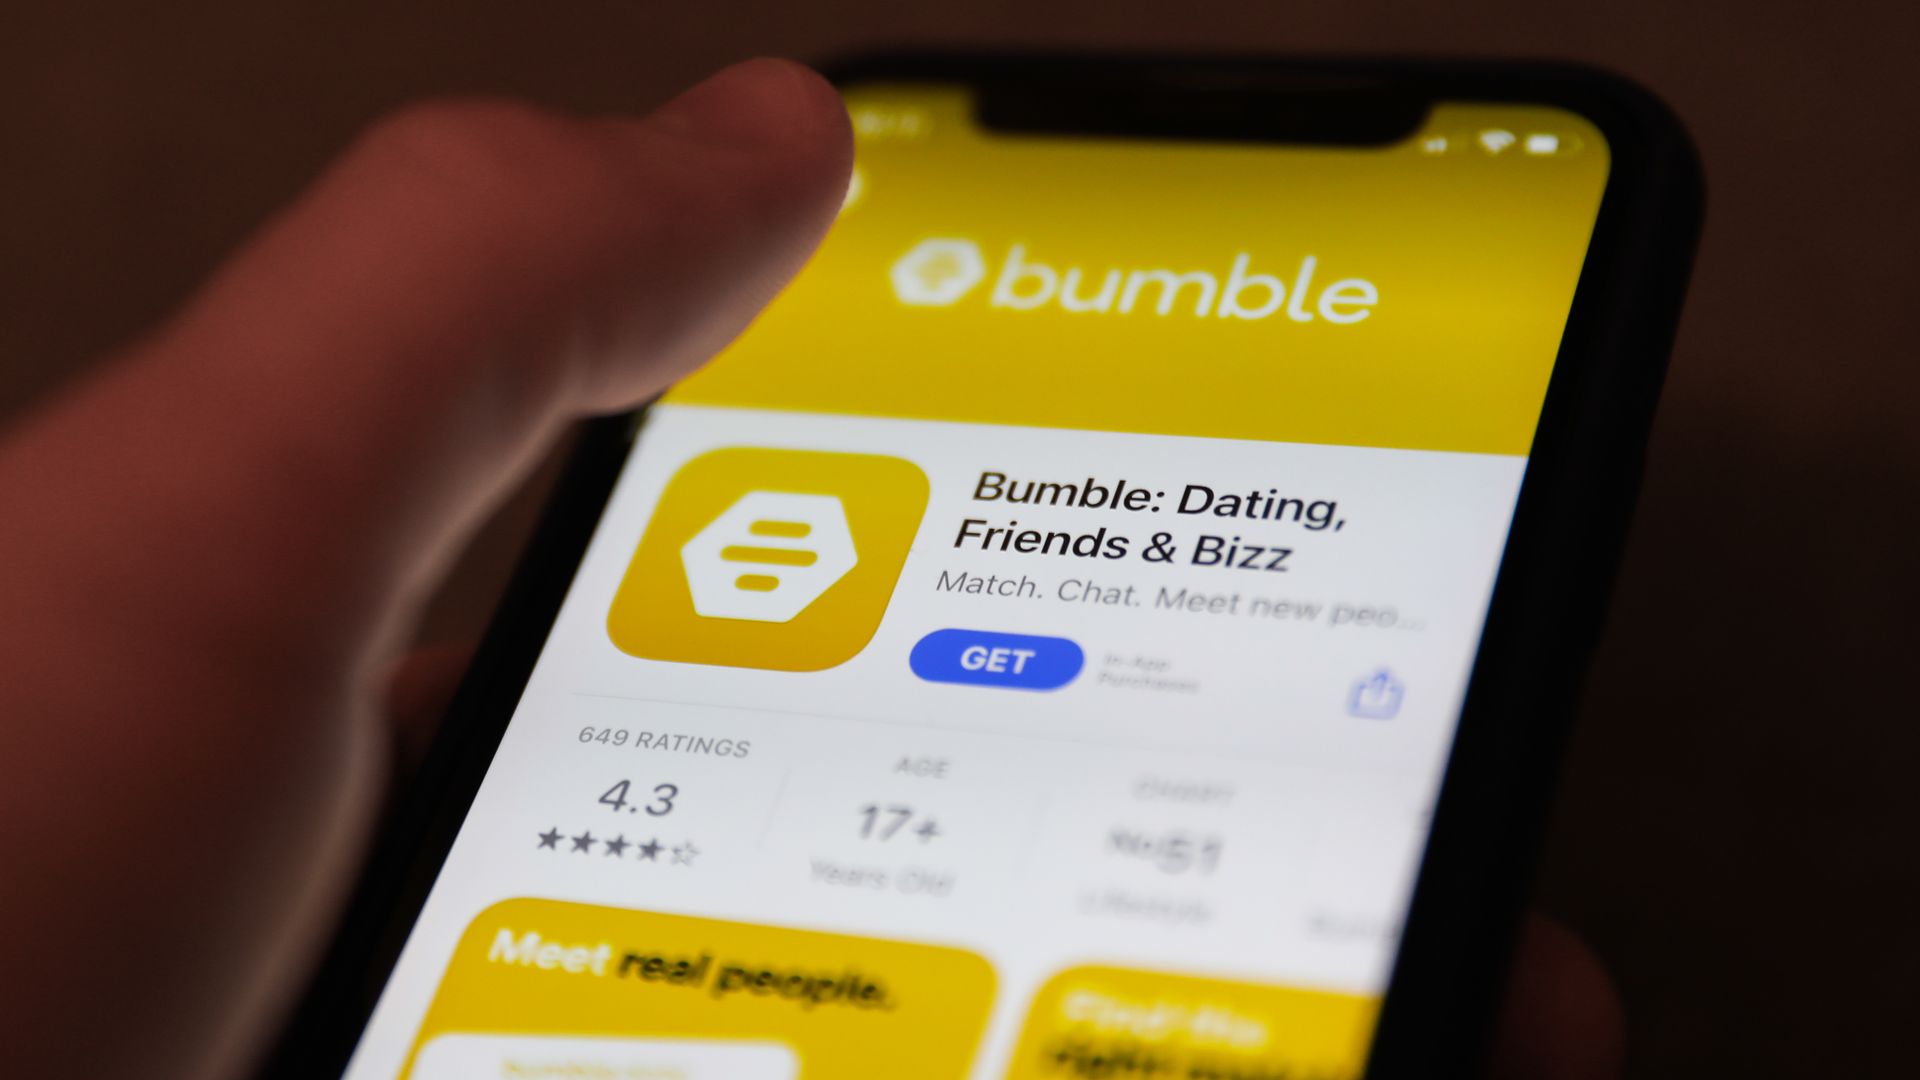 A photo of a hand holding a phone with the Bumble app on display.